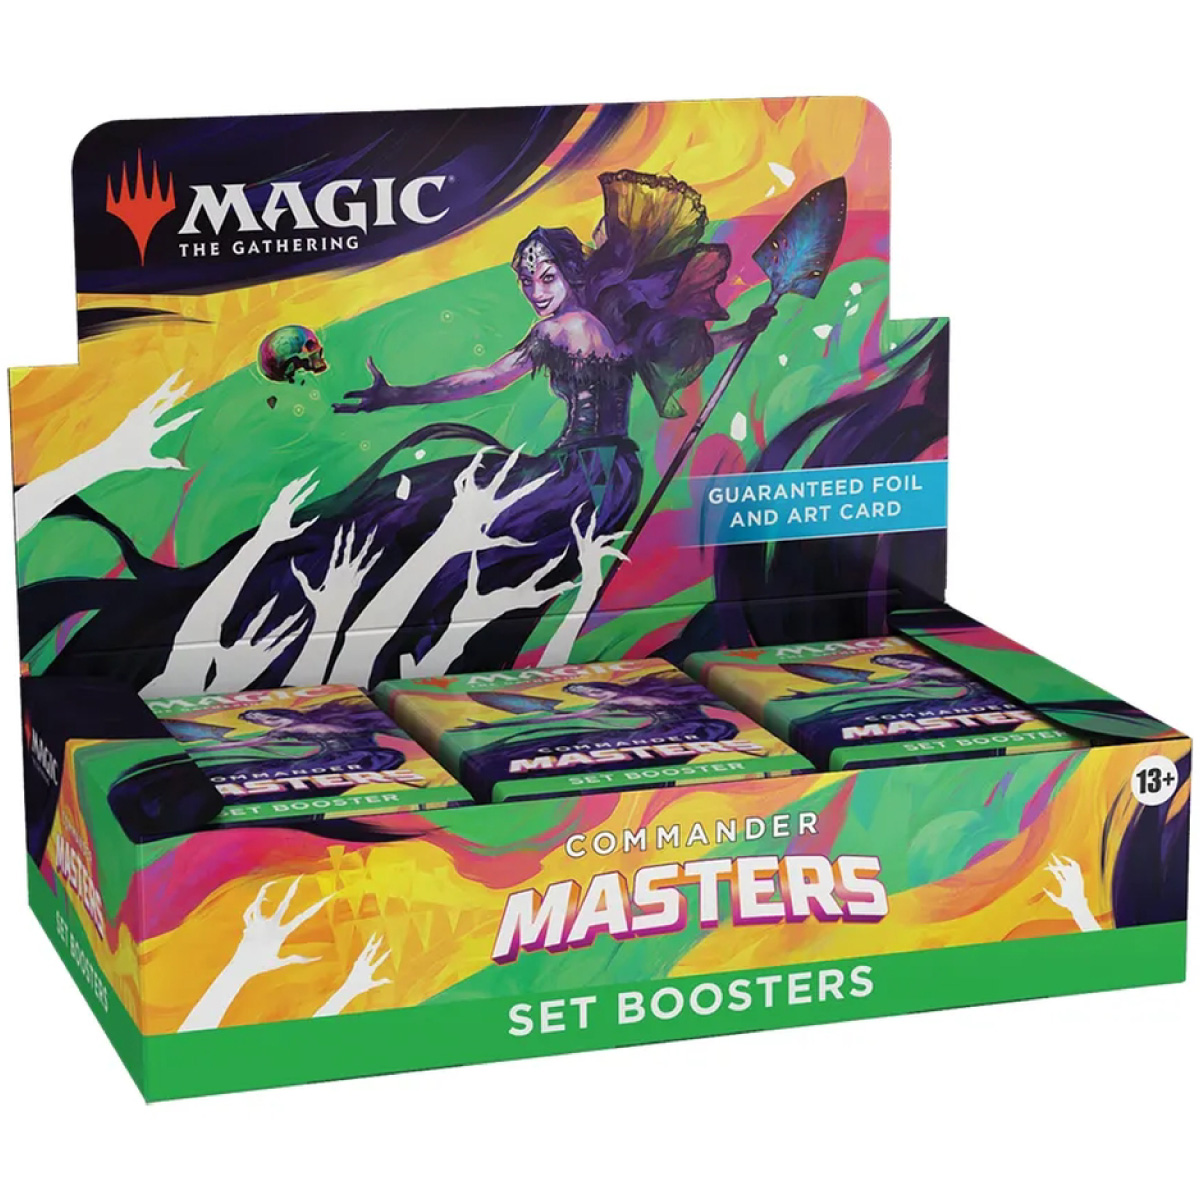 commander masters - set boosters - box 24 buste (inglese)